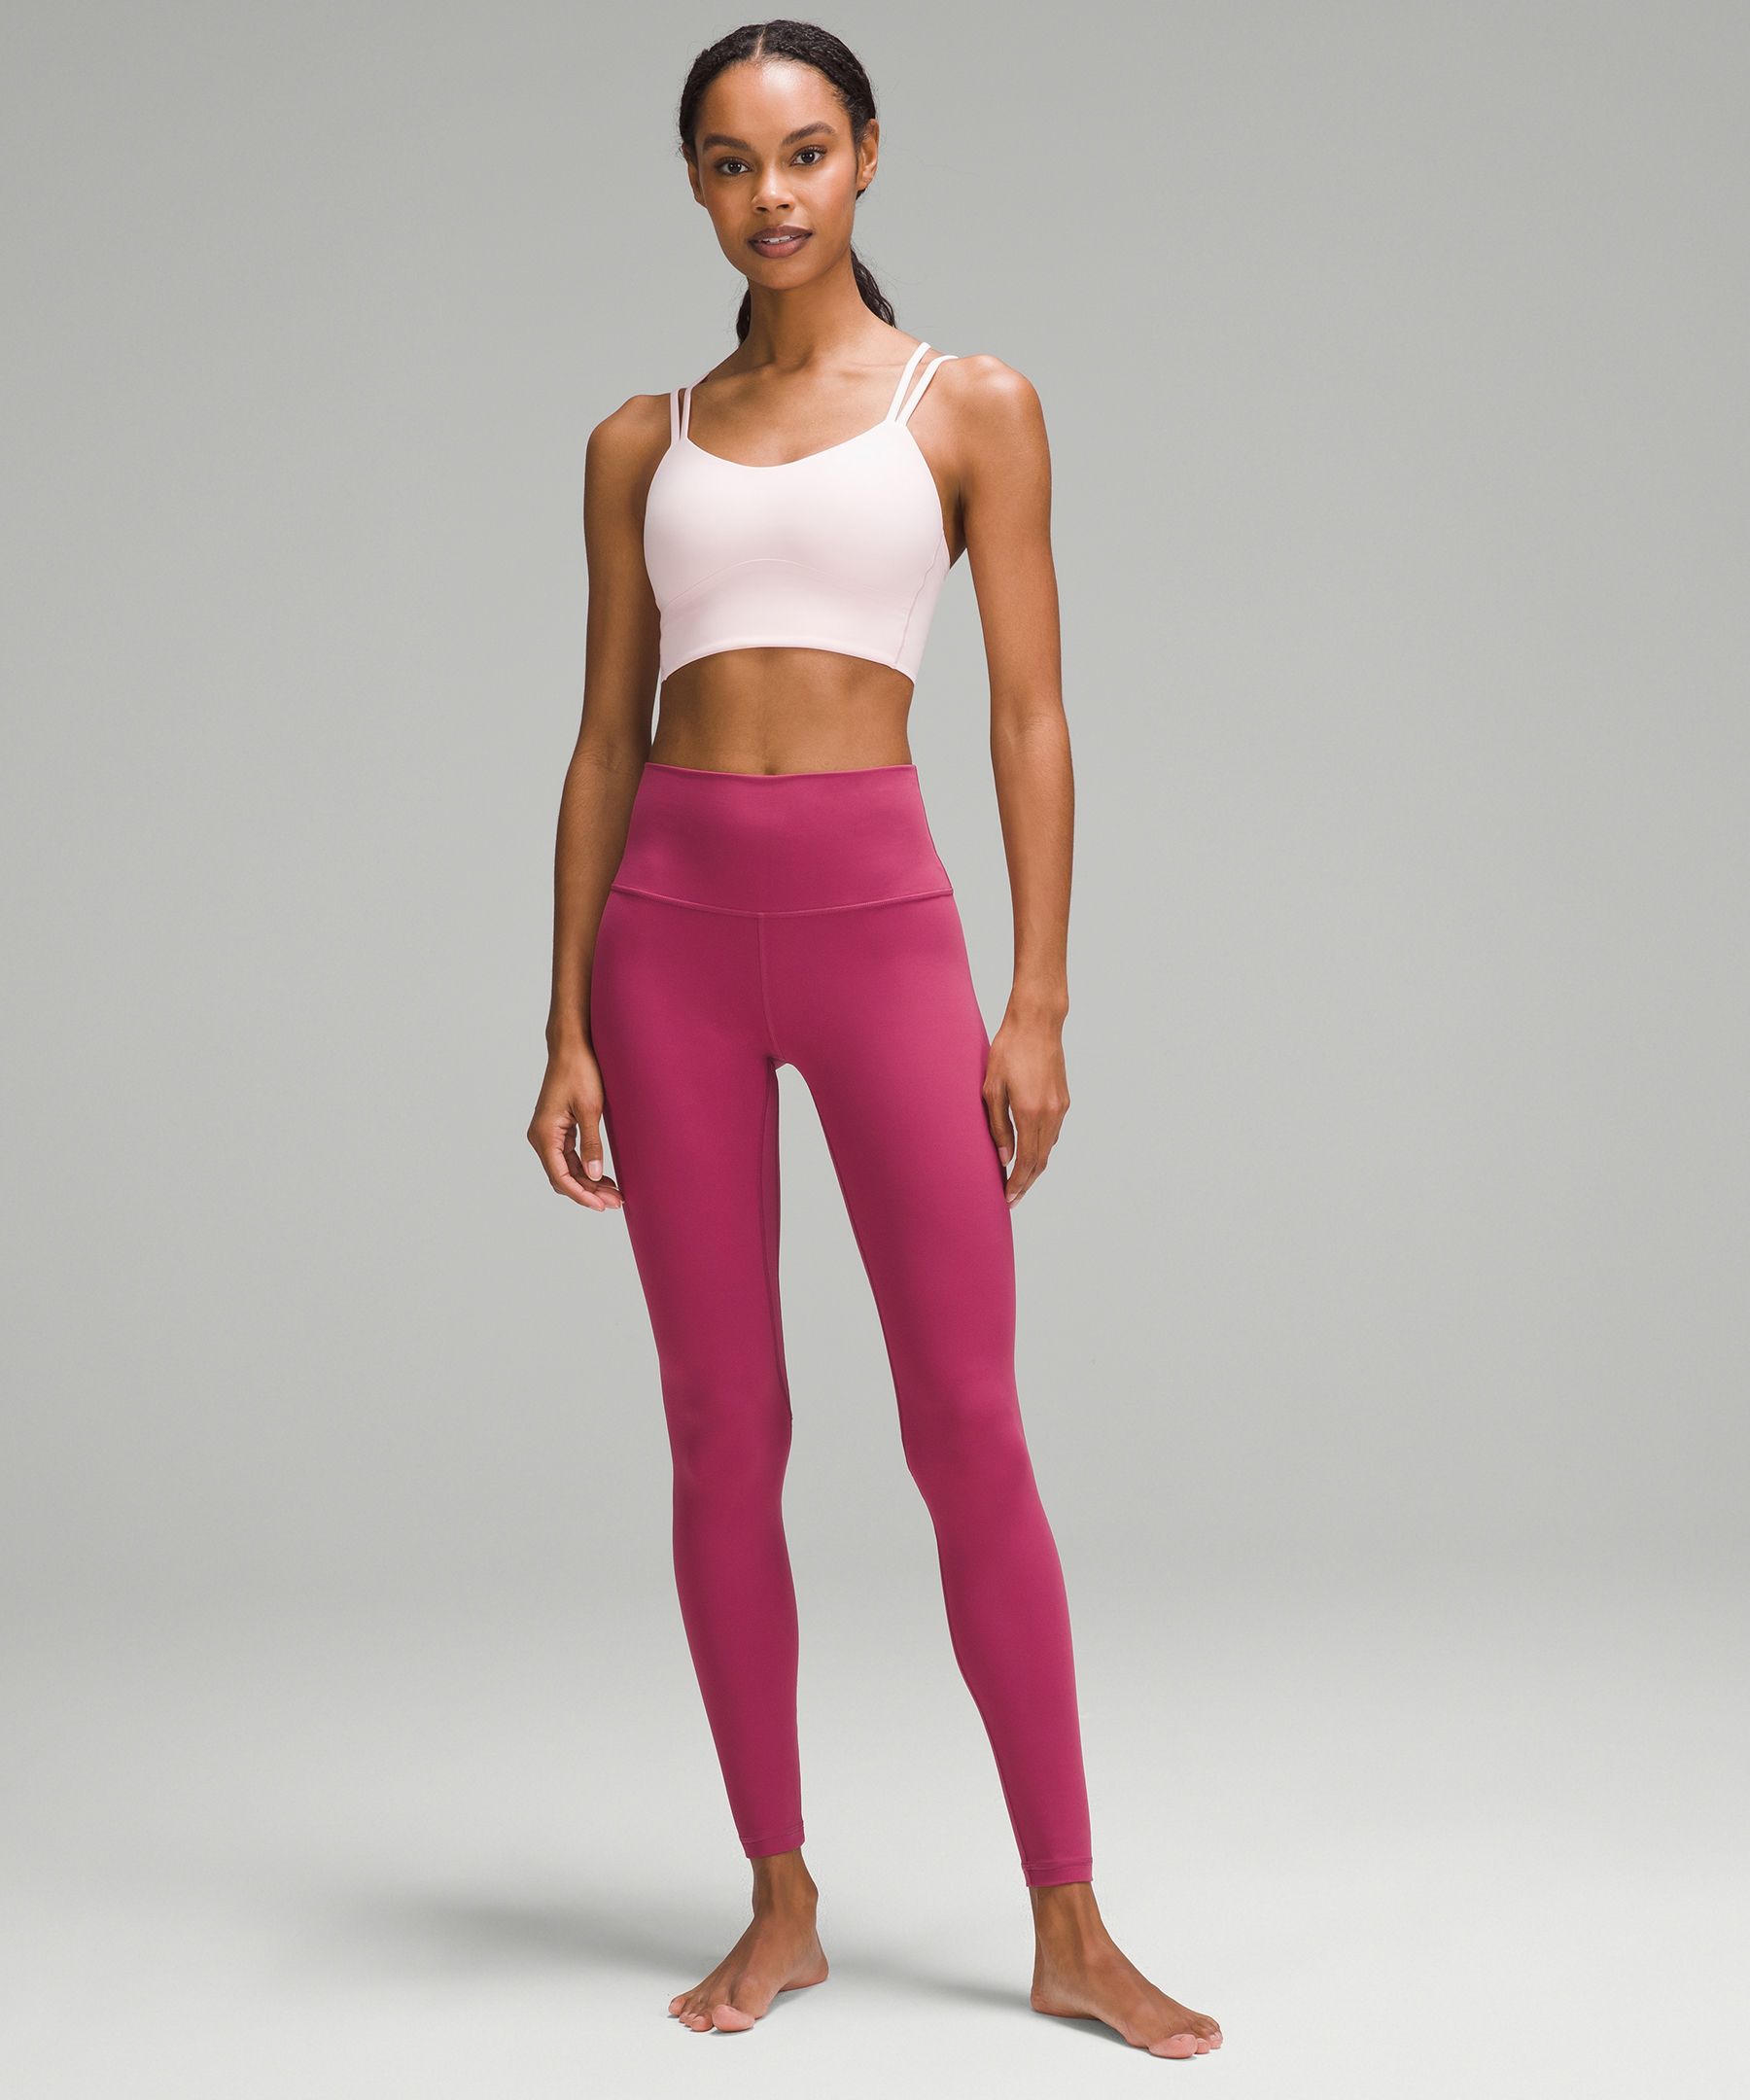 Pin by B on Energetic Flow  Gym clothes women, Fitness wear